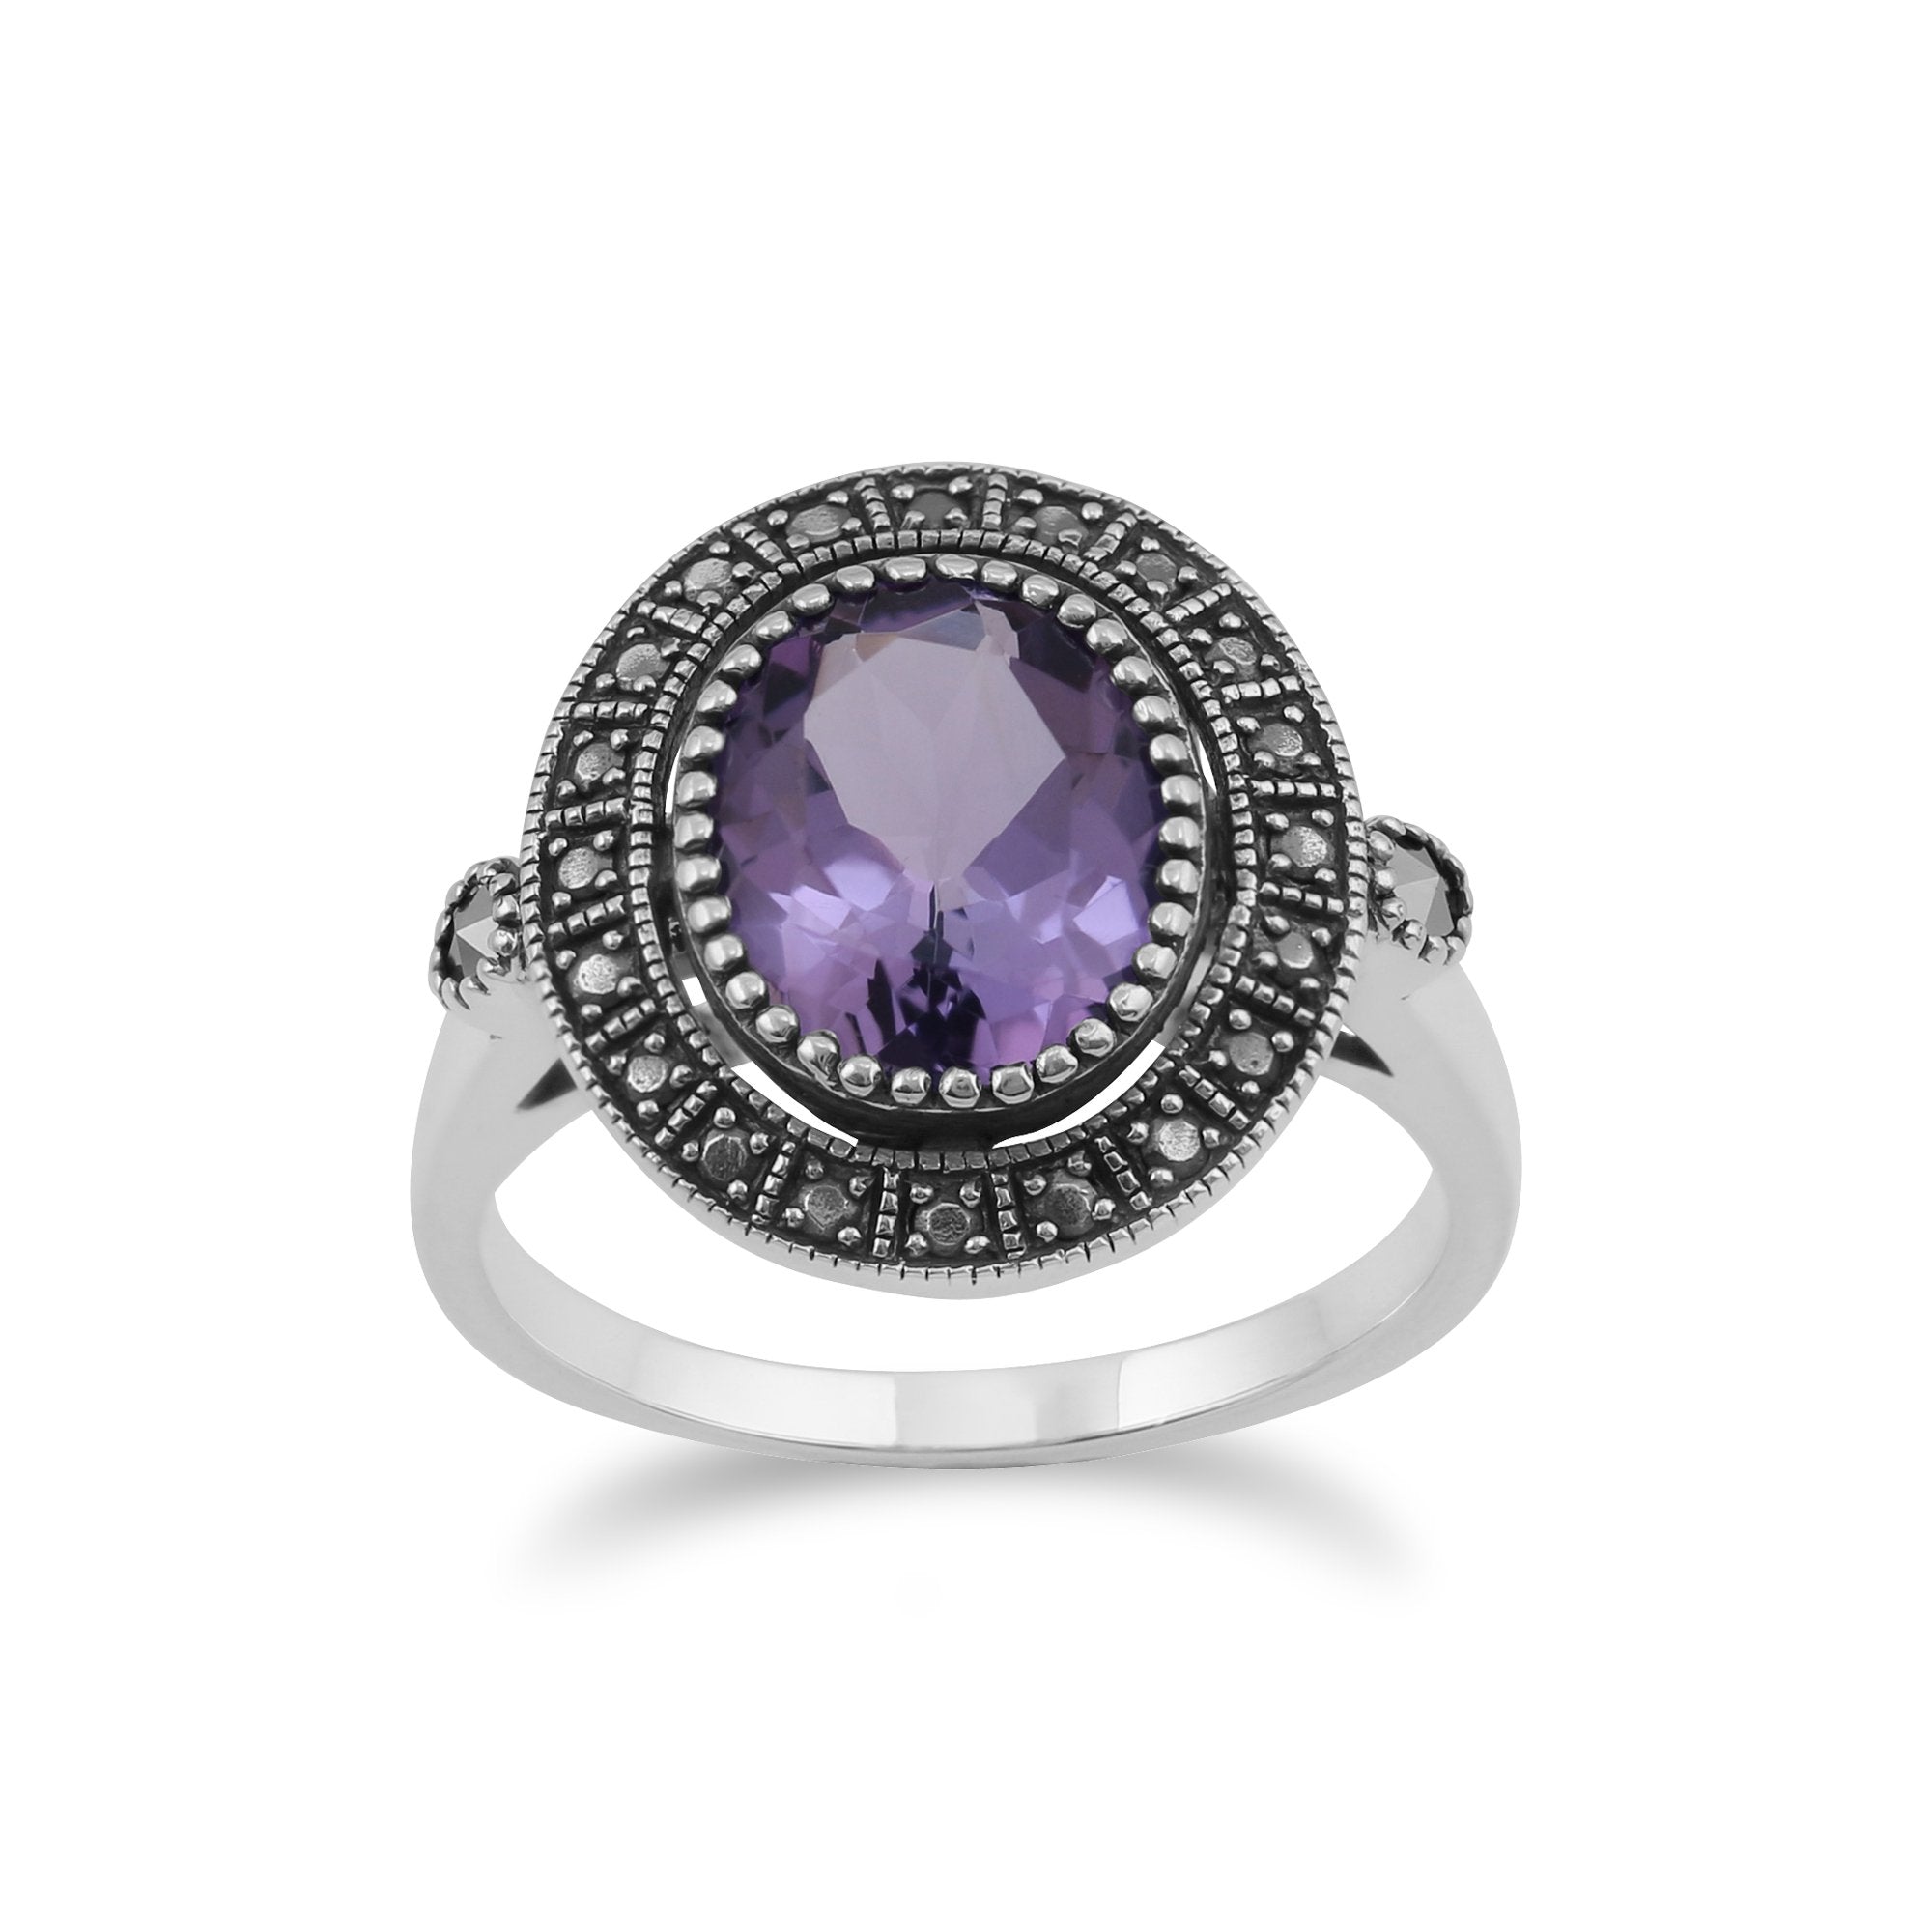 Art Deco Style Oval Amethyst & Marcasite Statement Cocktail Ring in 925 Sterling Silver